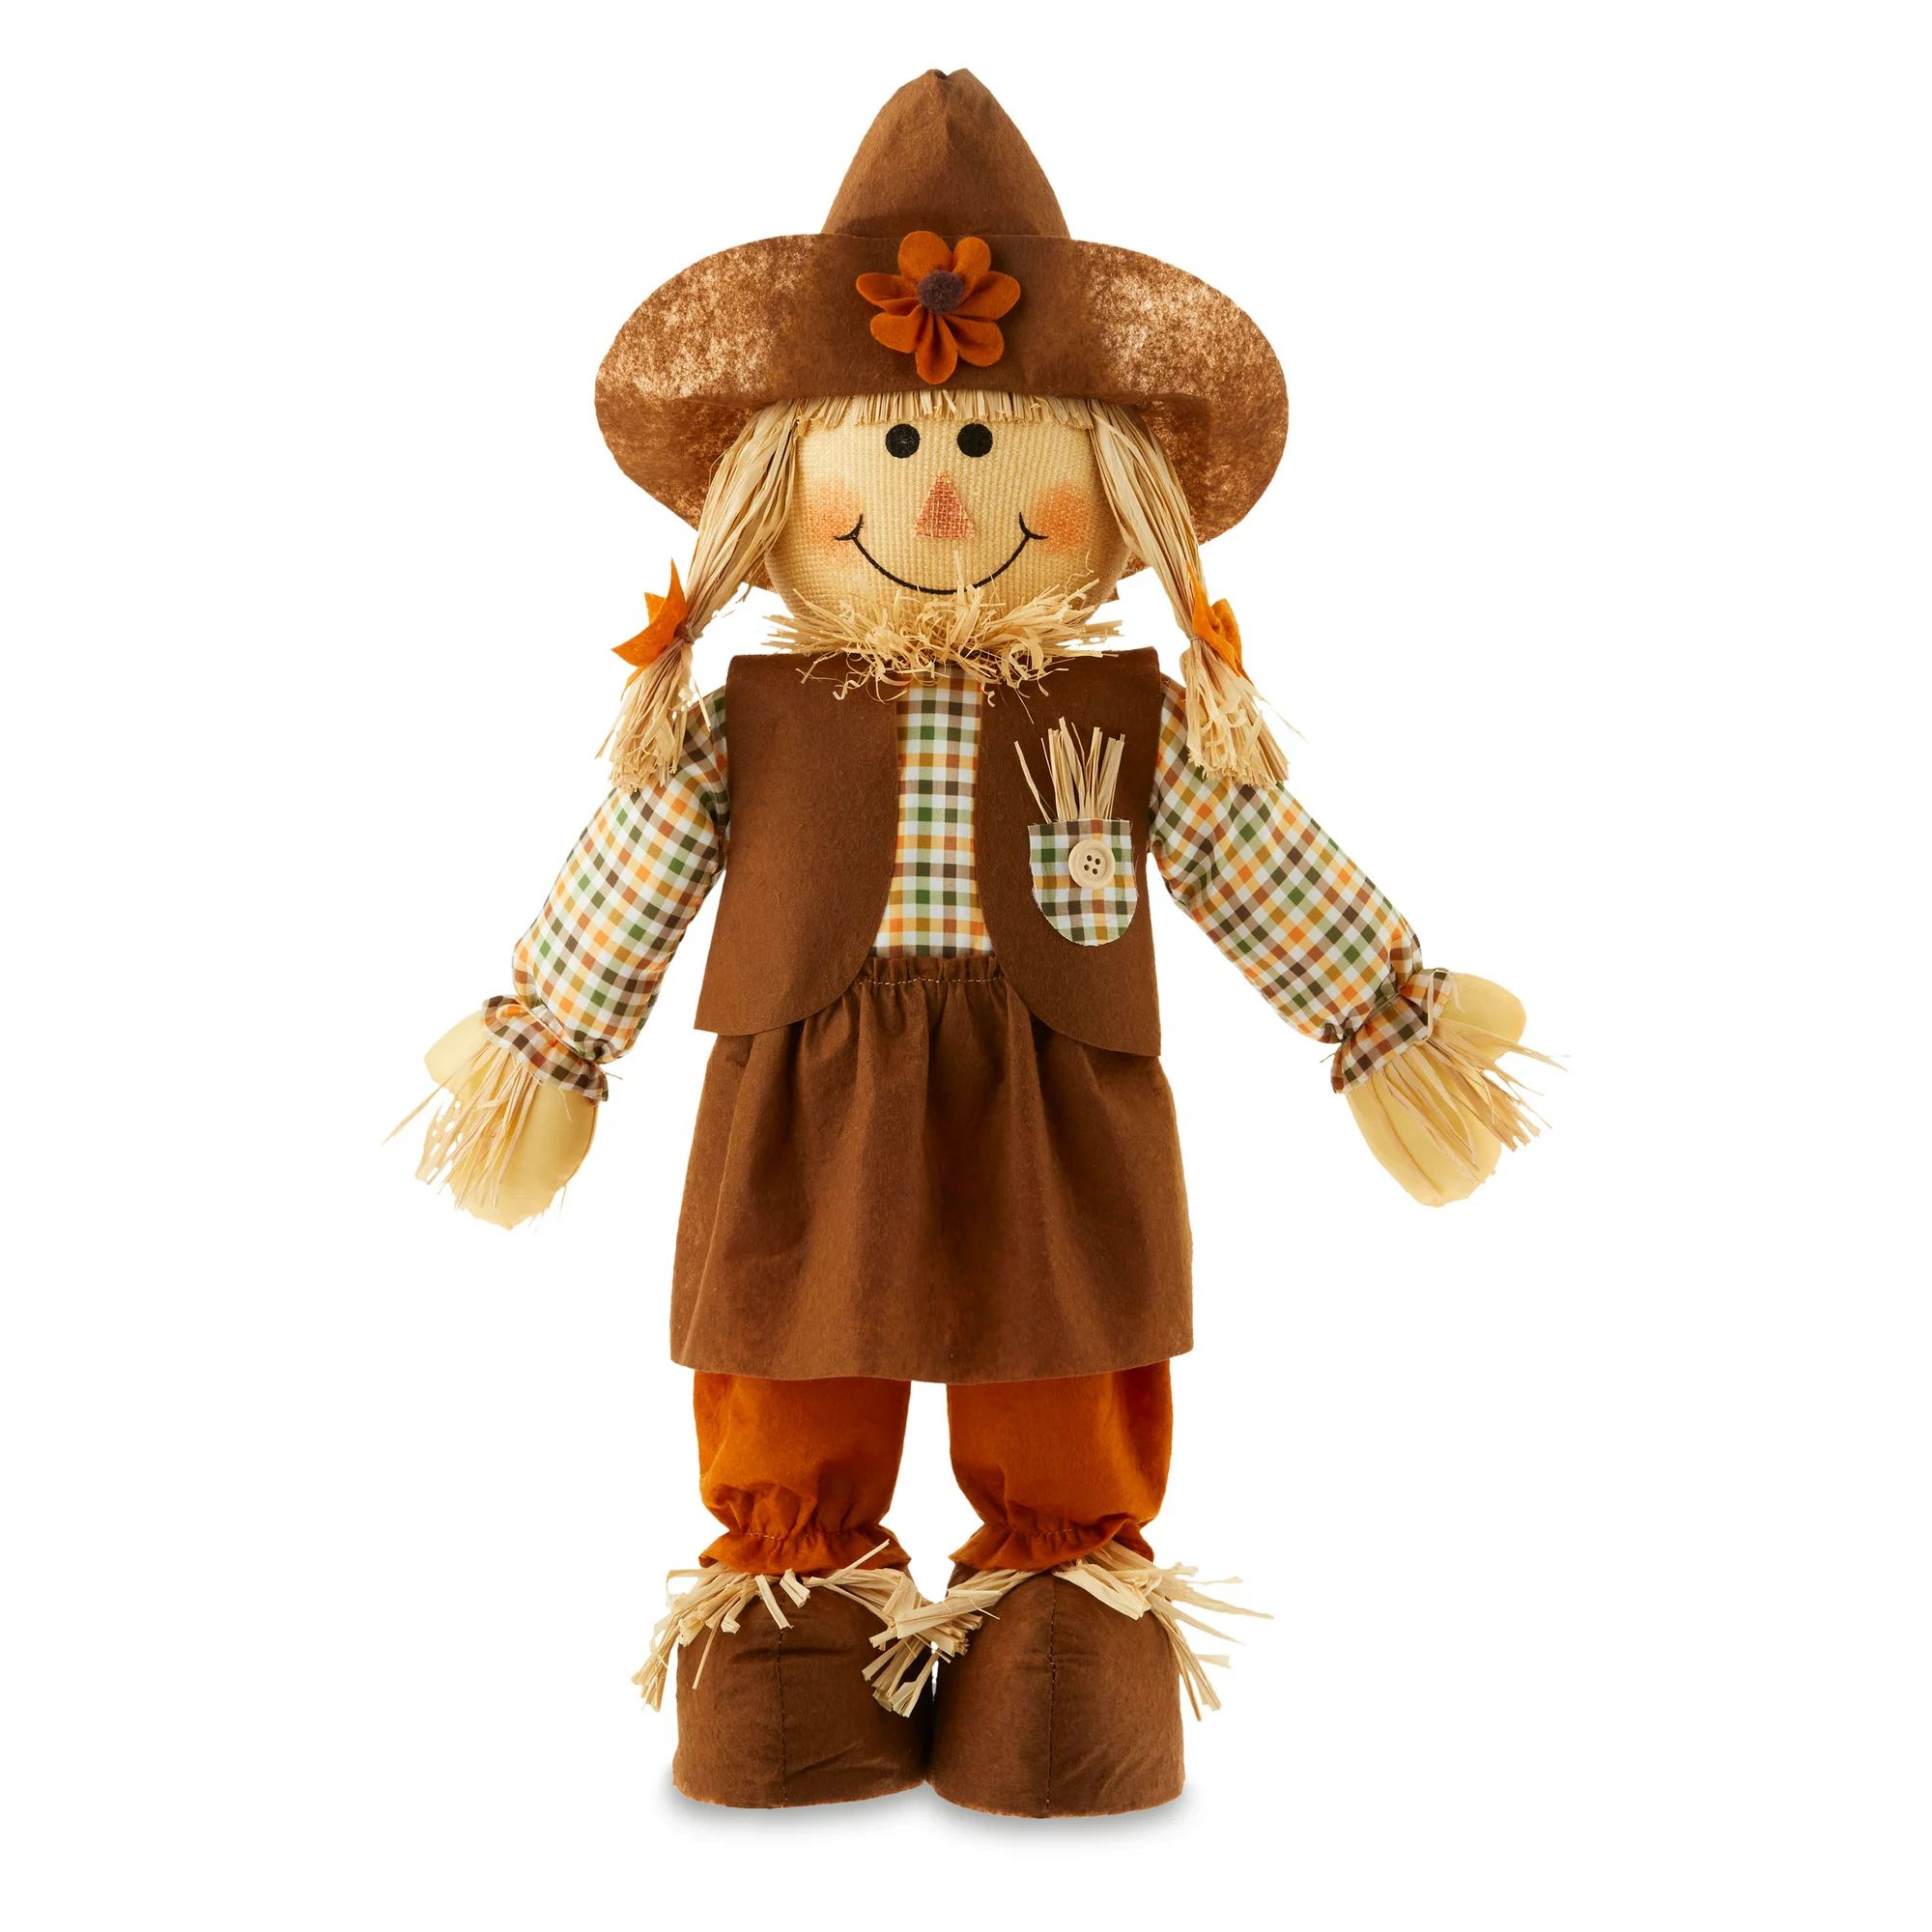 Harvest Standing Scarecrow Decoration, Multicolor, Fabric, 20", by Way To Celebrate | Walmart (US)